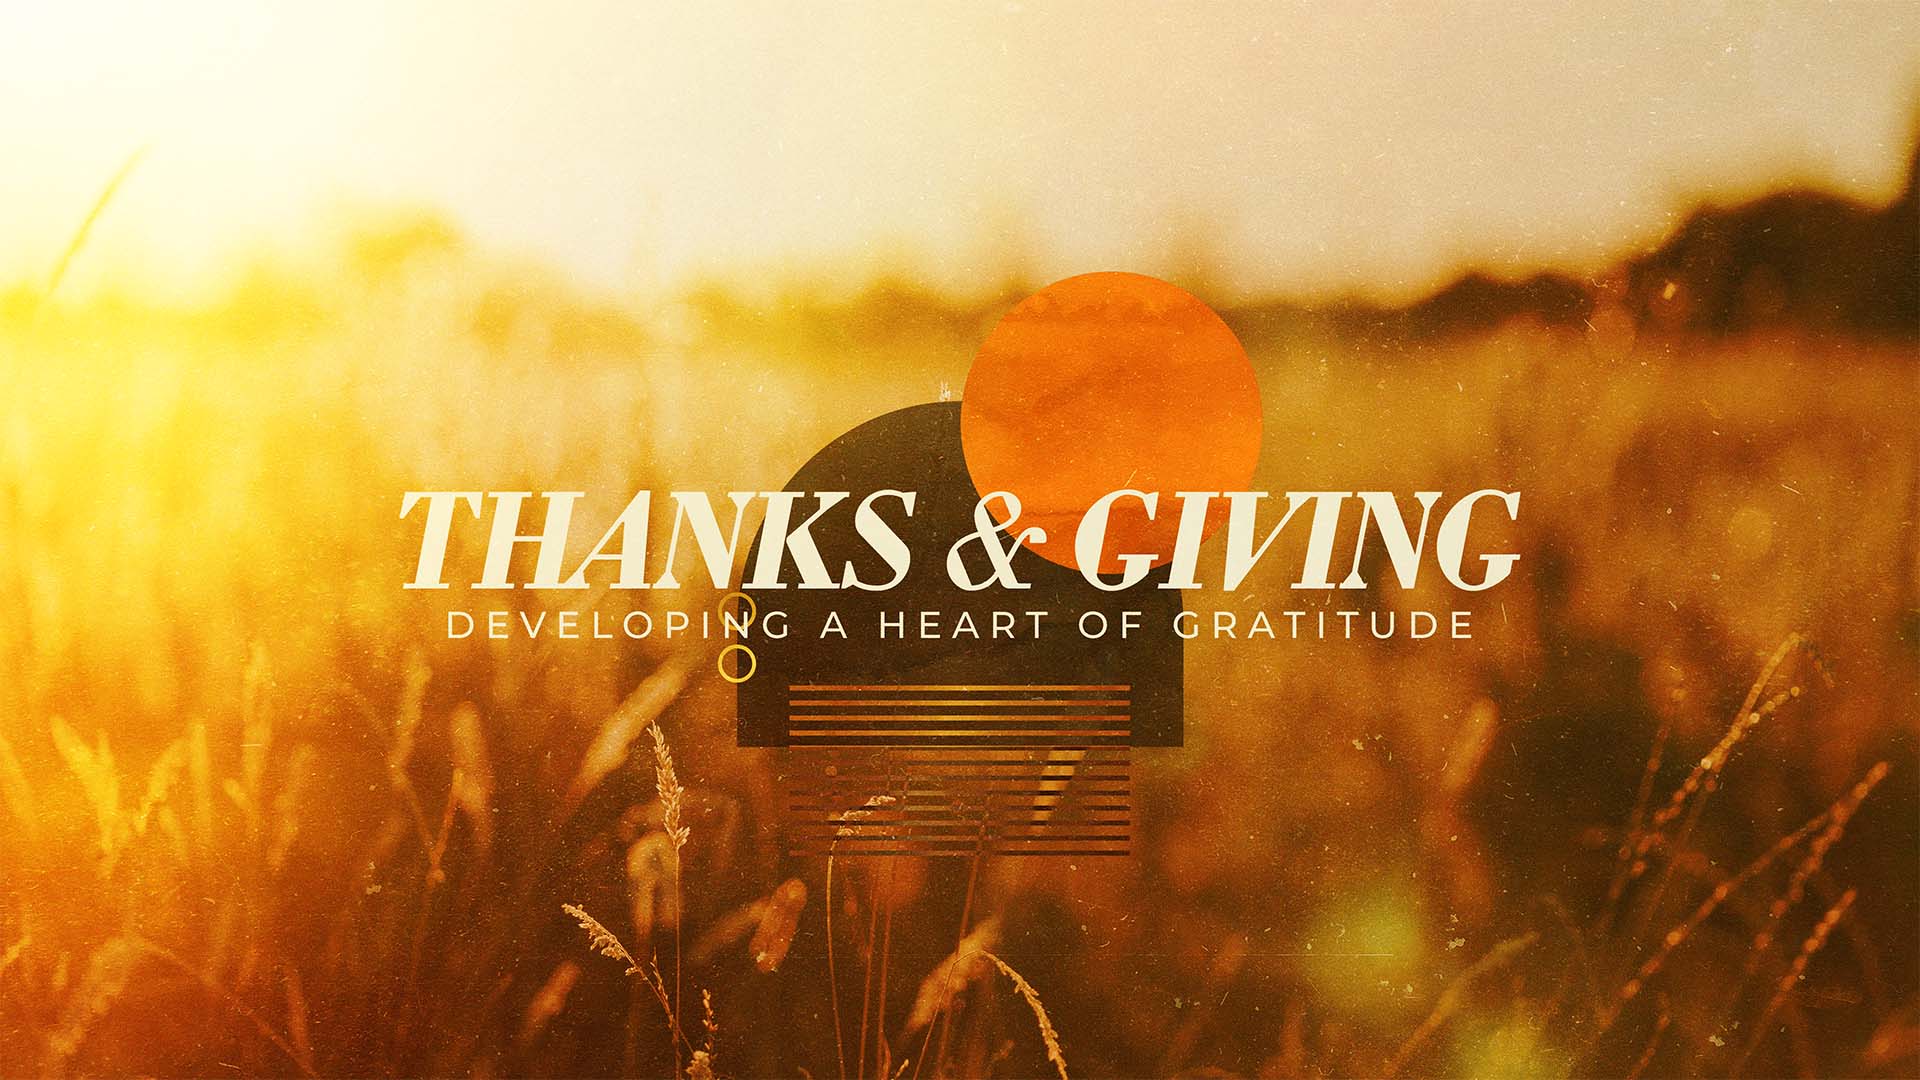 "Thanks & Giving: Developing A Heart Of Gratitude" Message